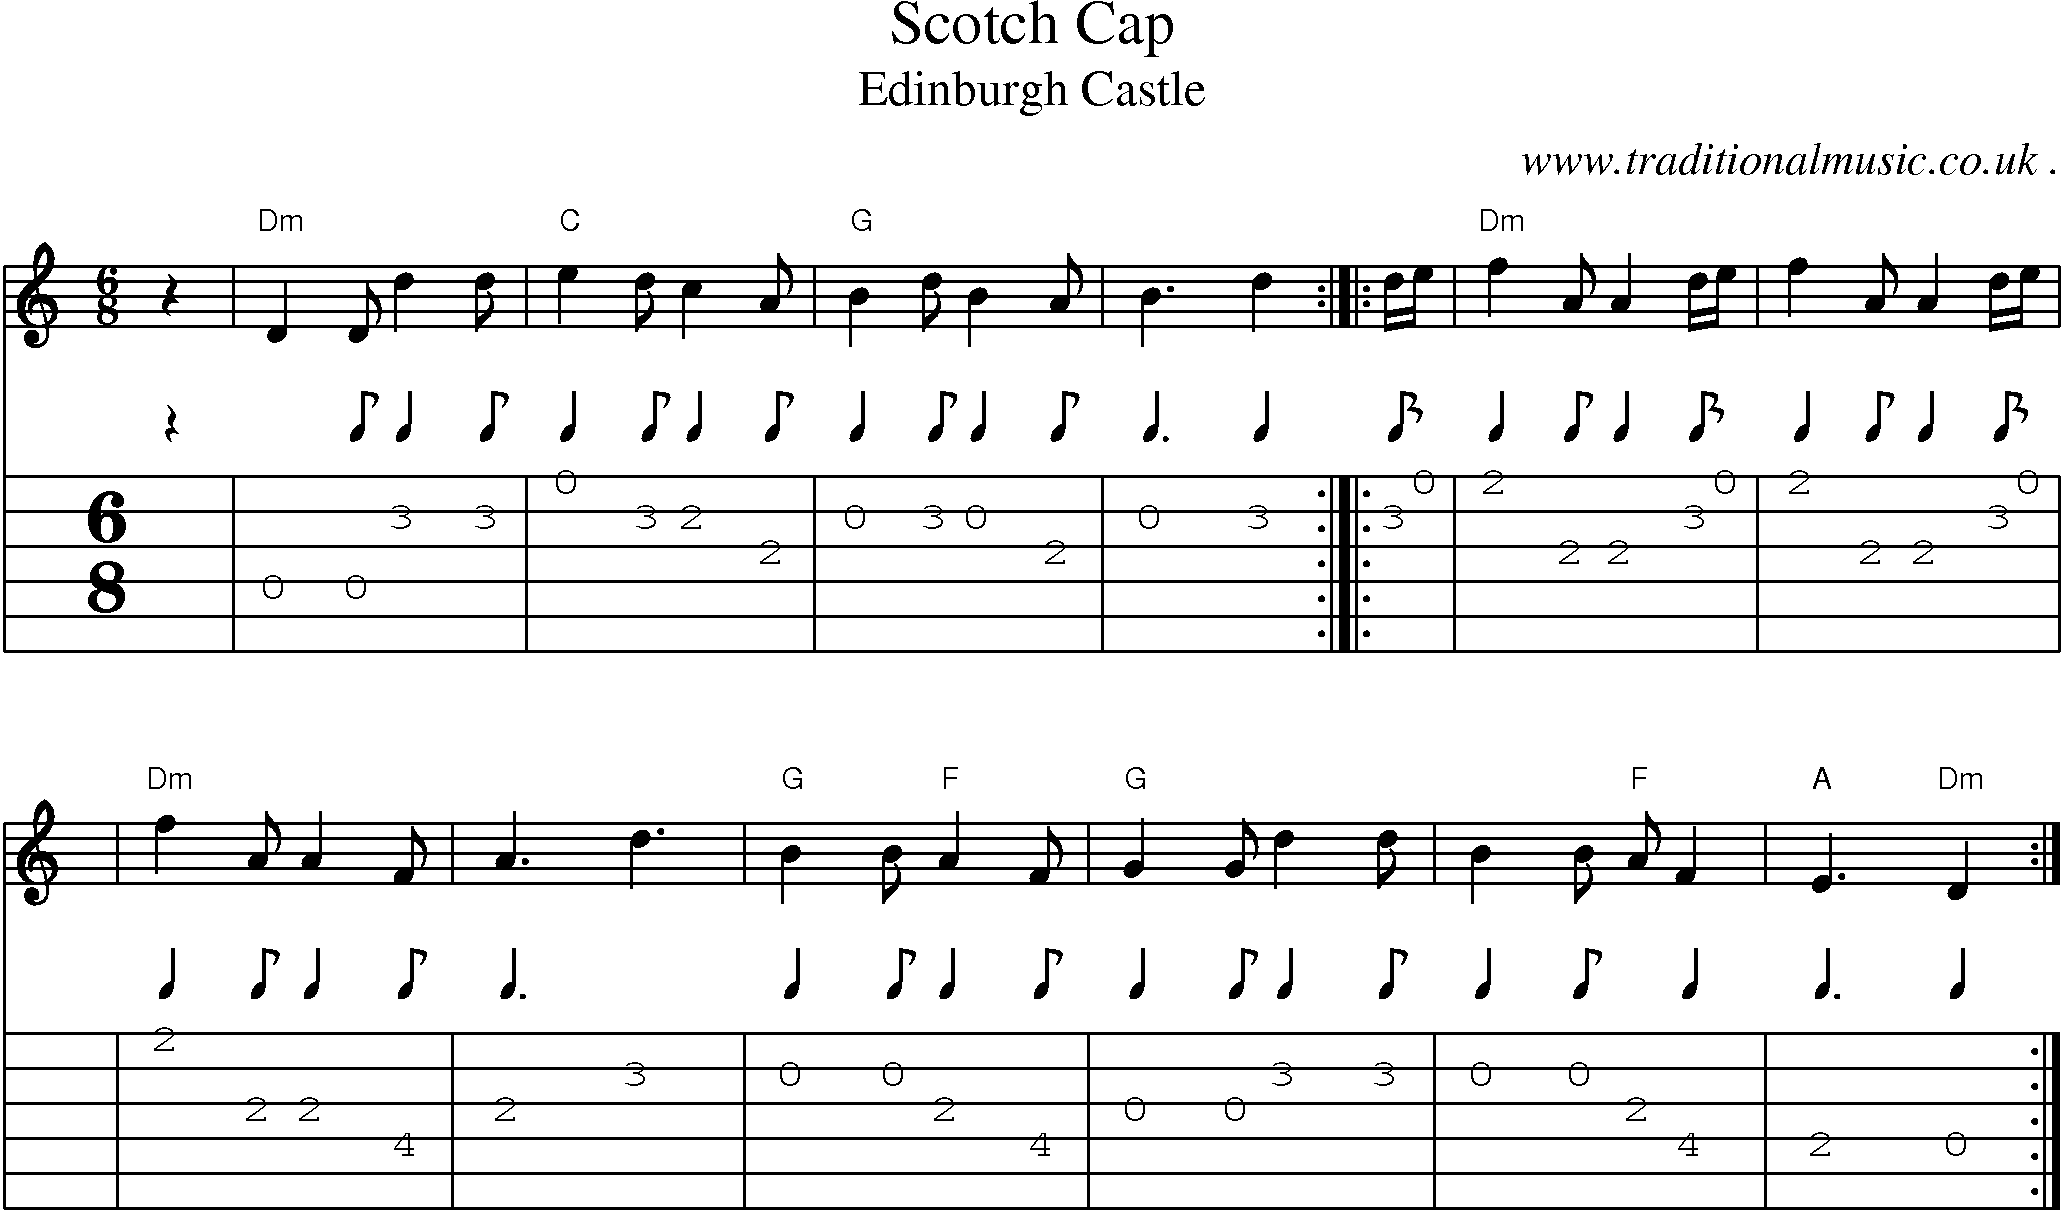 Sheet-music  score, Chords and Guitar Tabs for Scotch Cap